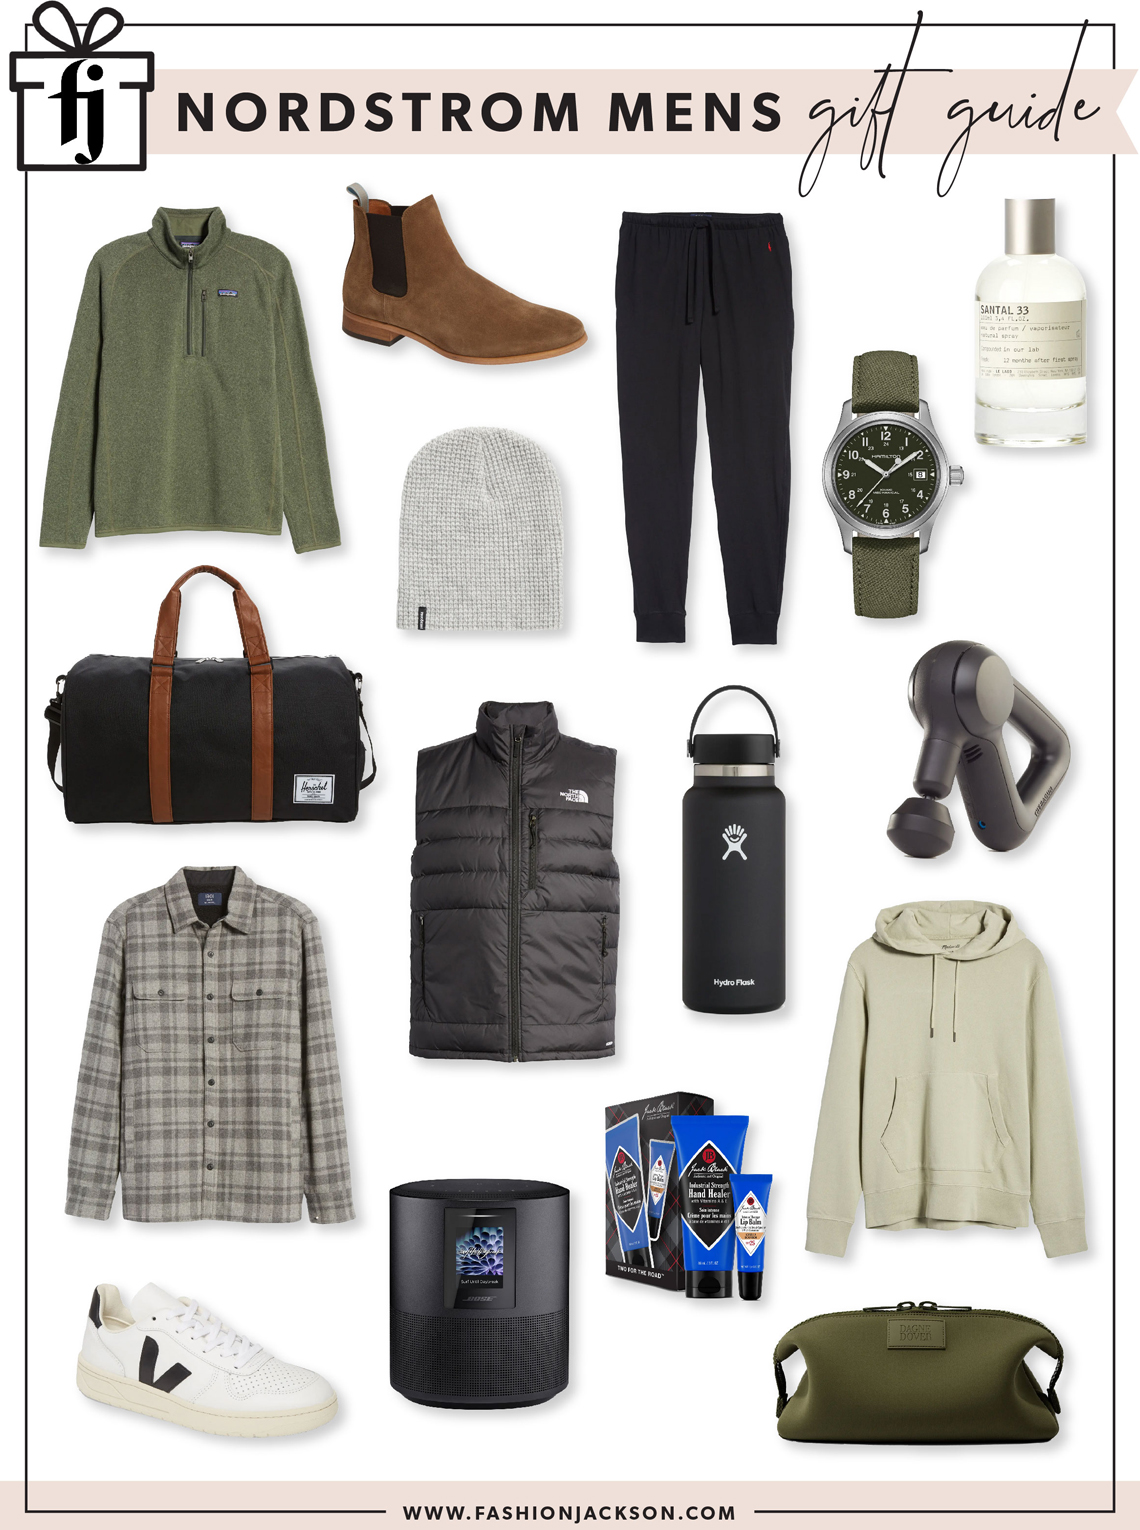 Fashion Jackson Holiday 2020 Nordstrom Mens Gift Guide